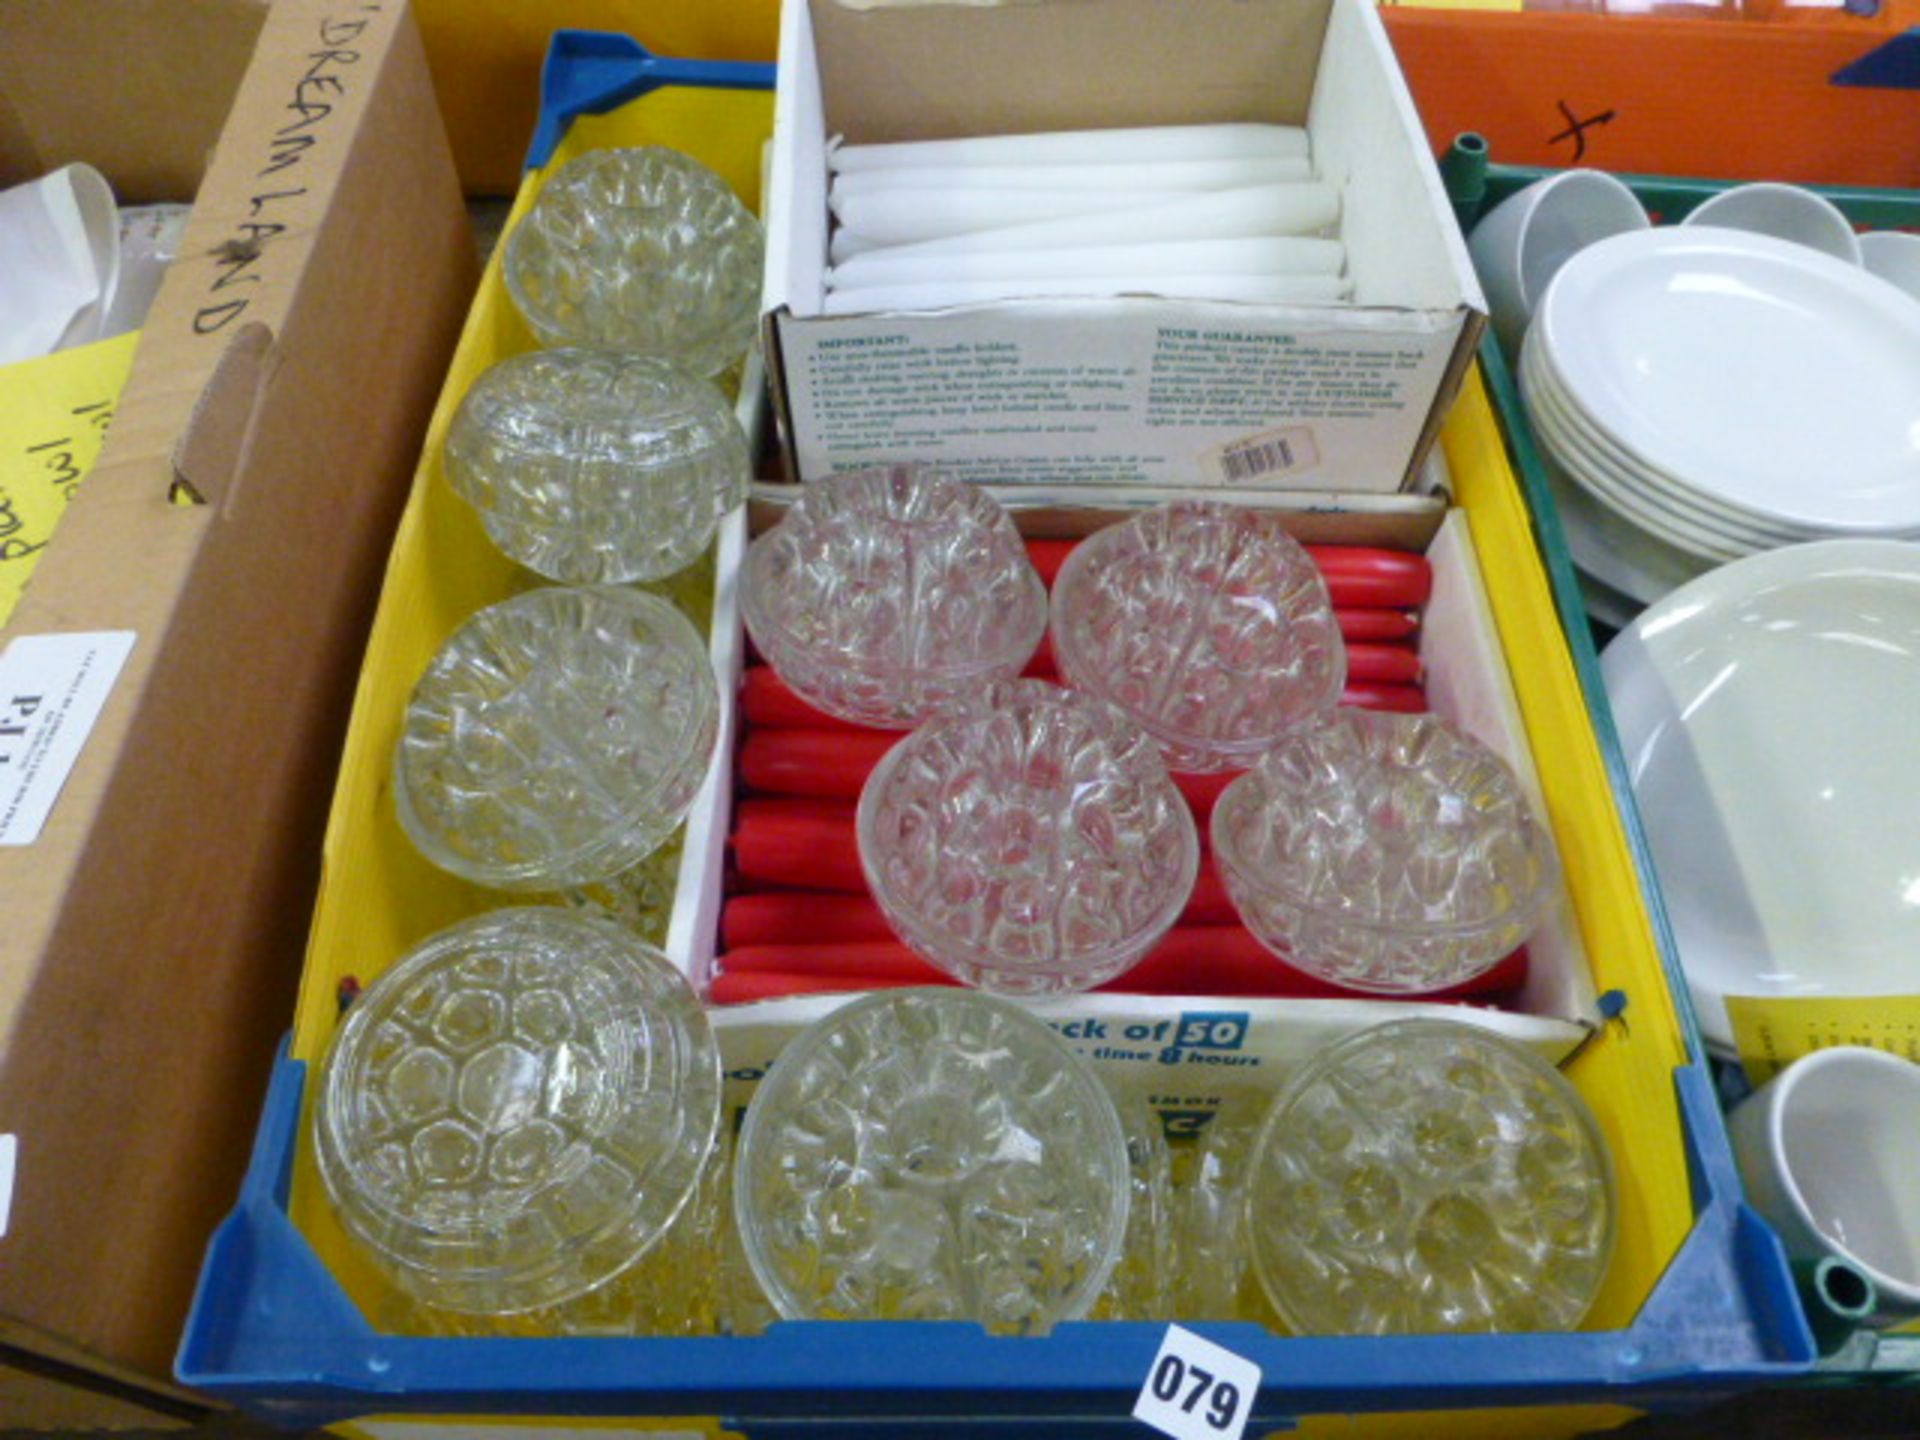 Plastic tray of candle sticks and candle stick holders